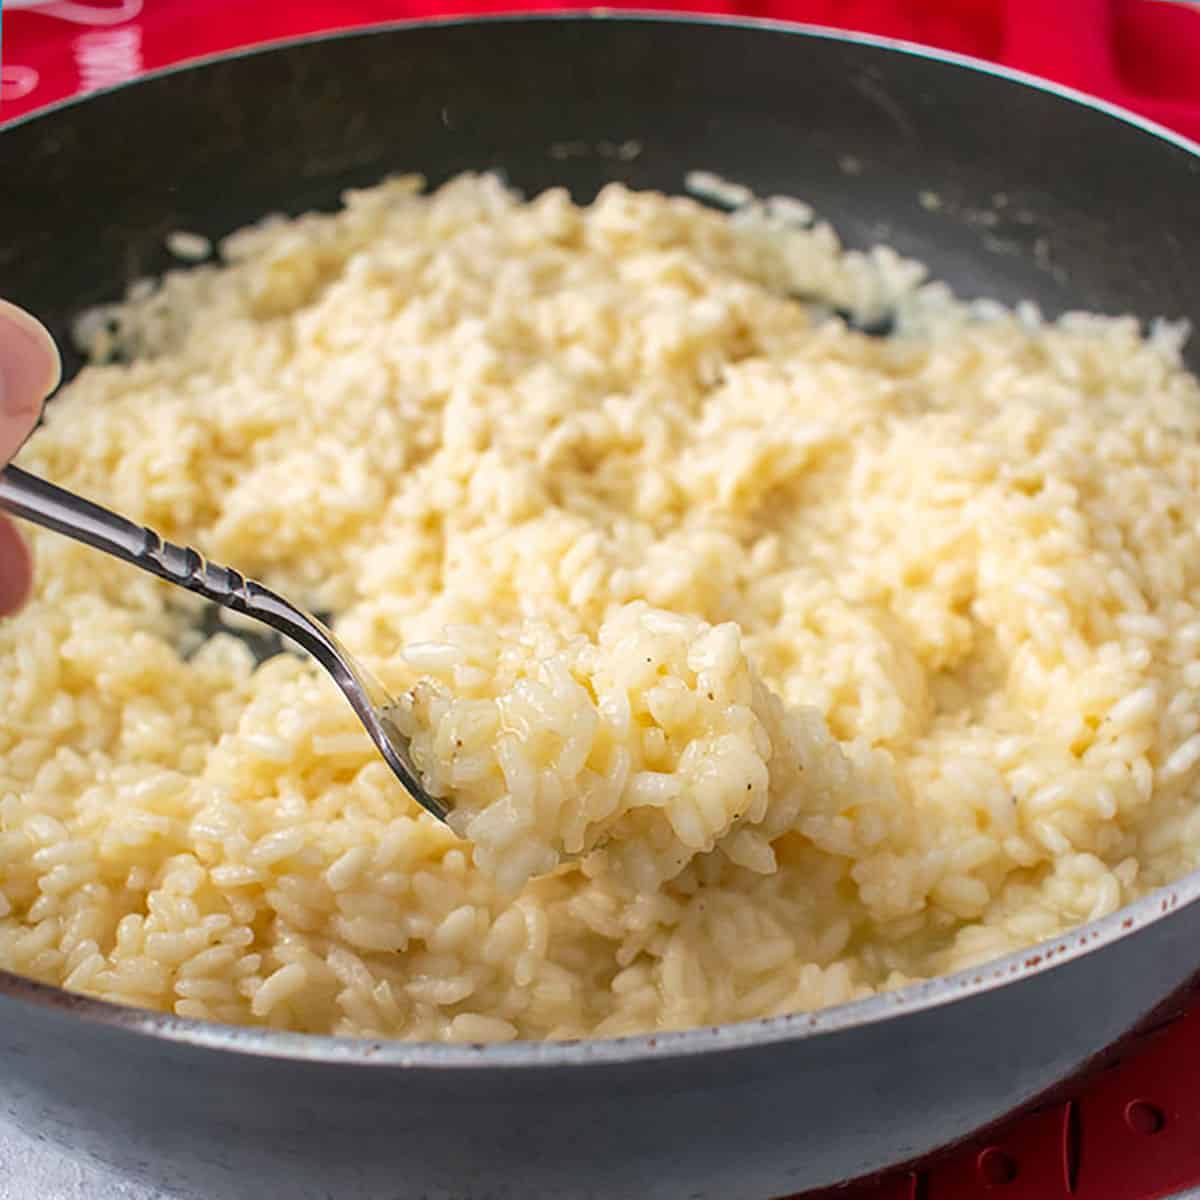 https://cookingwithmammac.com/wp-content/uploads/2020/06/1200-Parmesan-Risotto-Recipe-Image.jpg